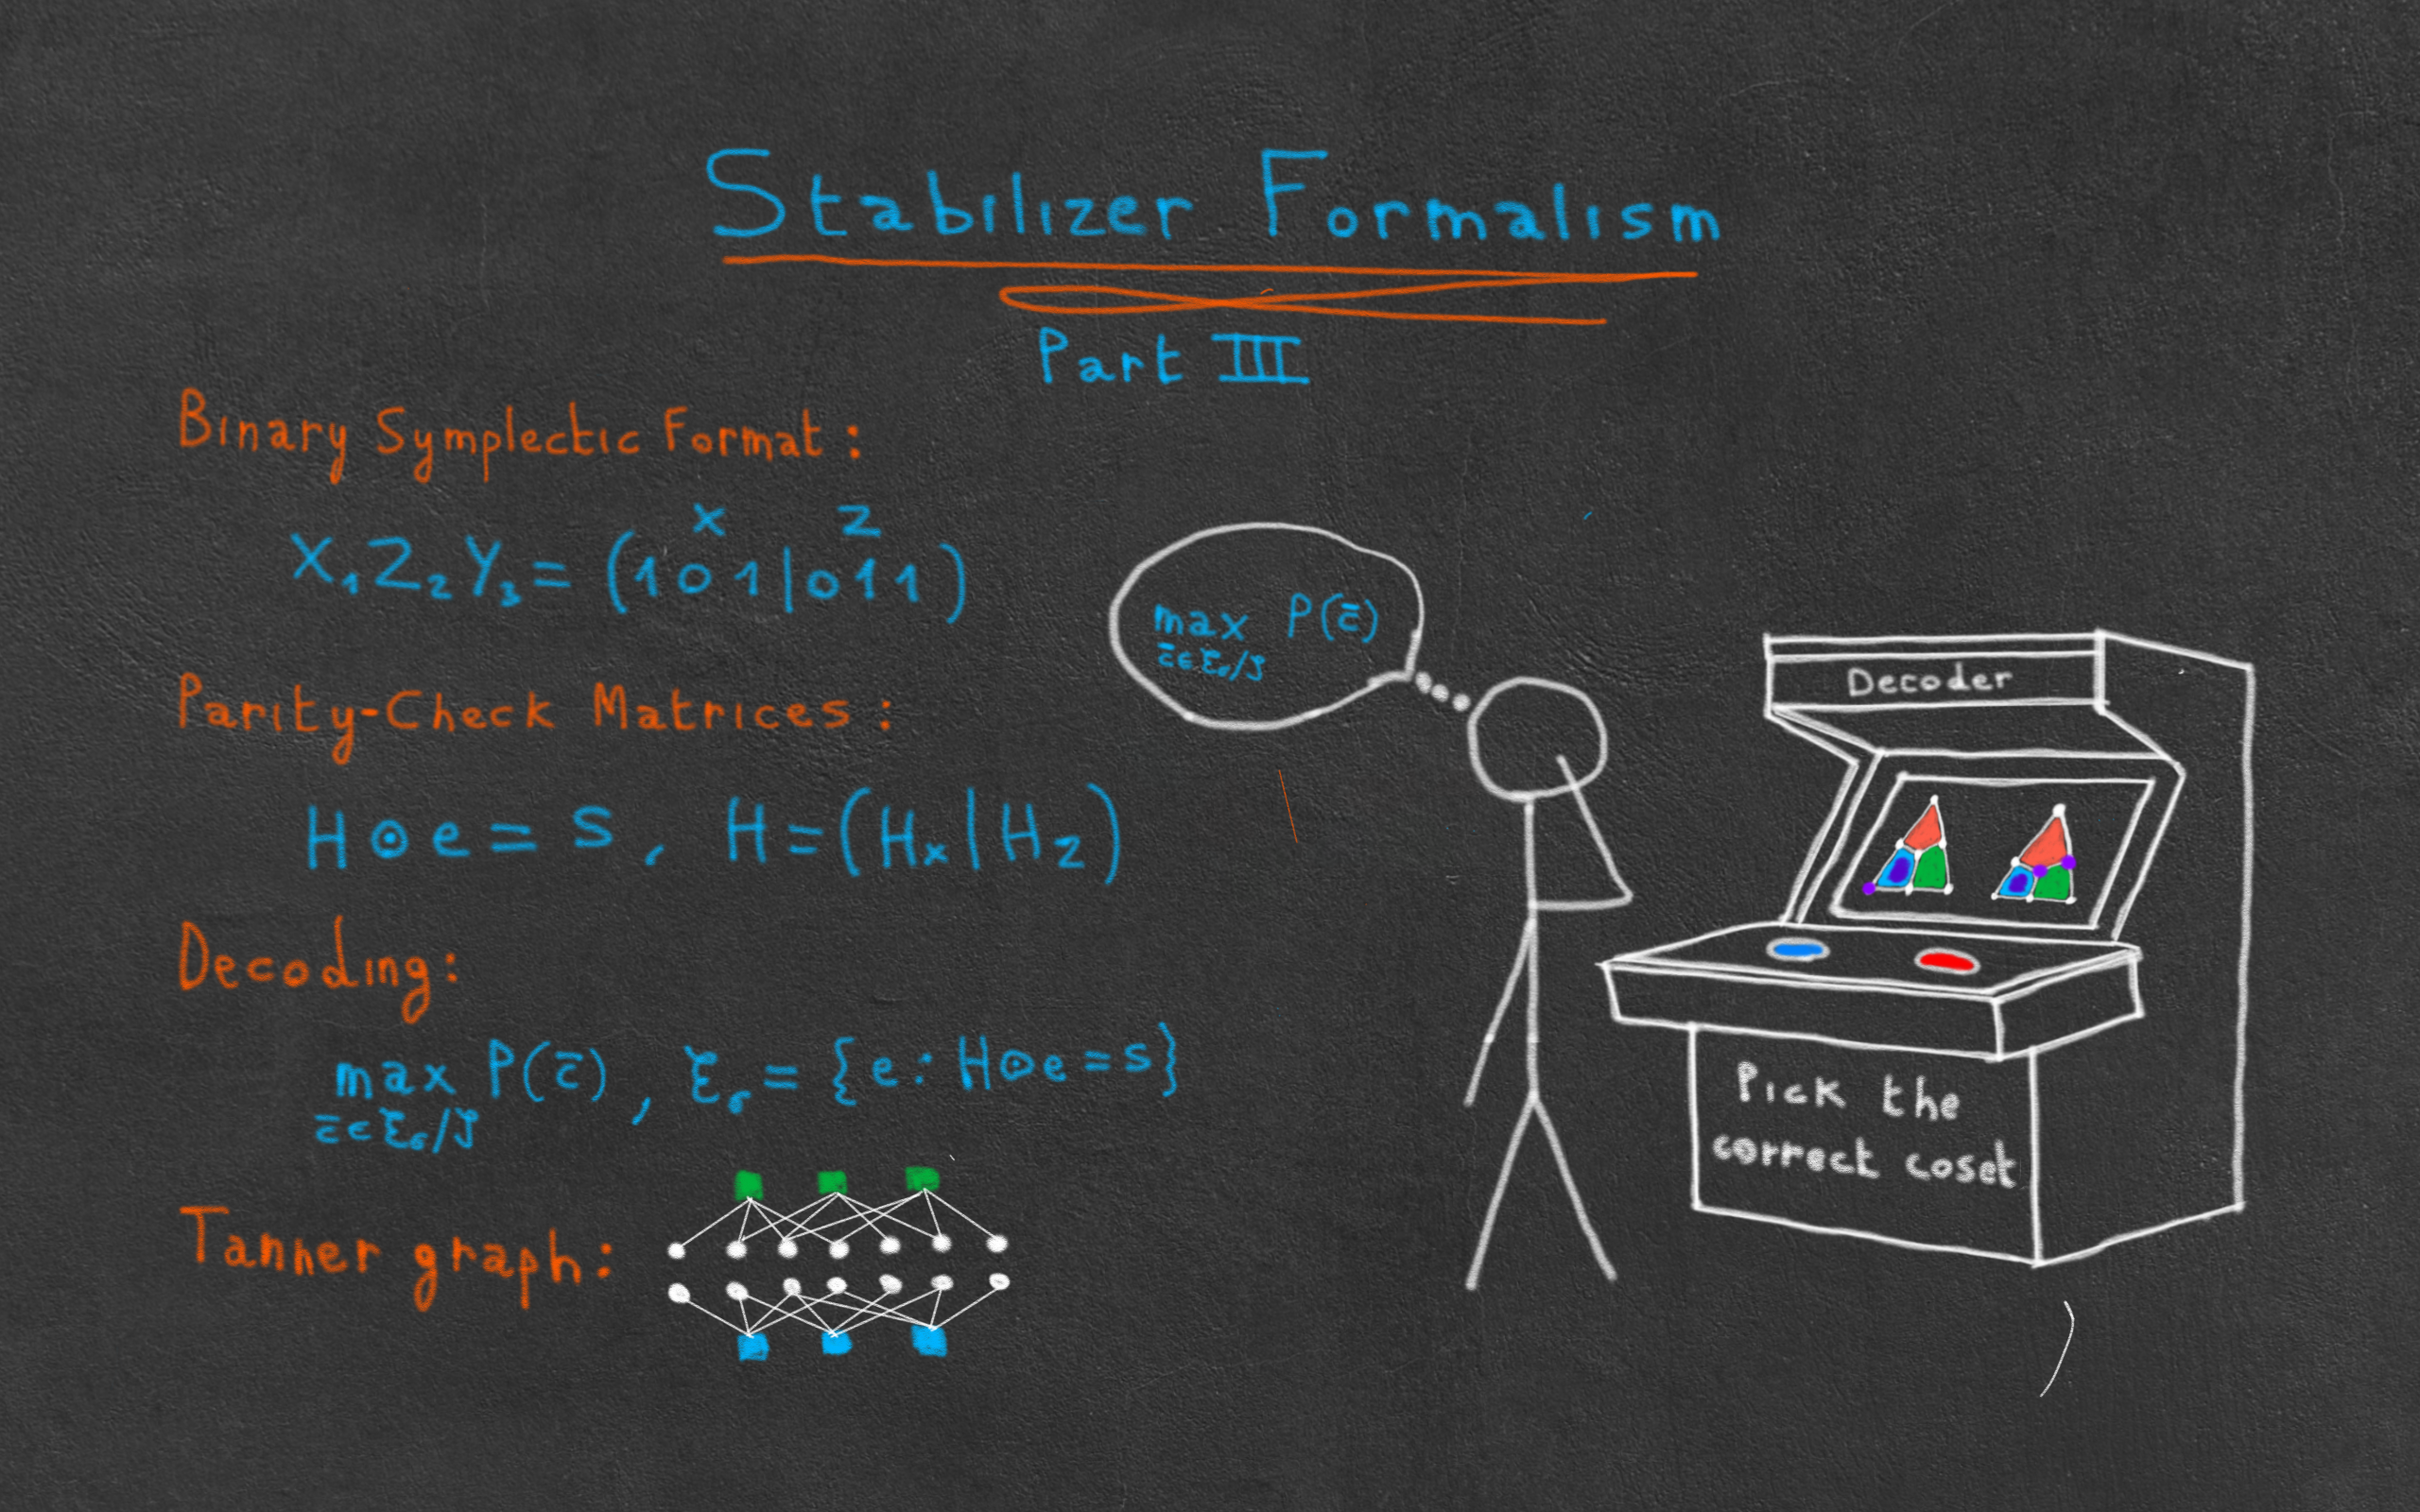 The stabilizer trilogy III — Parity-check matrices and decoding